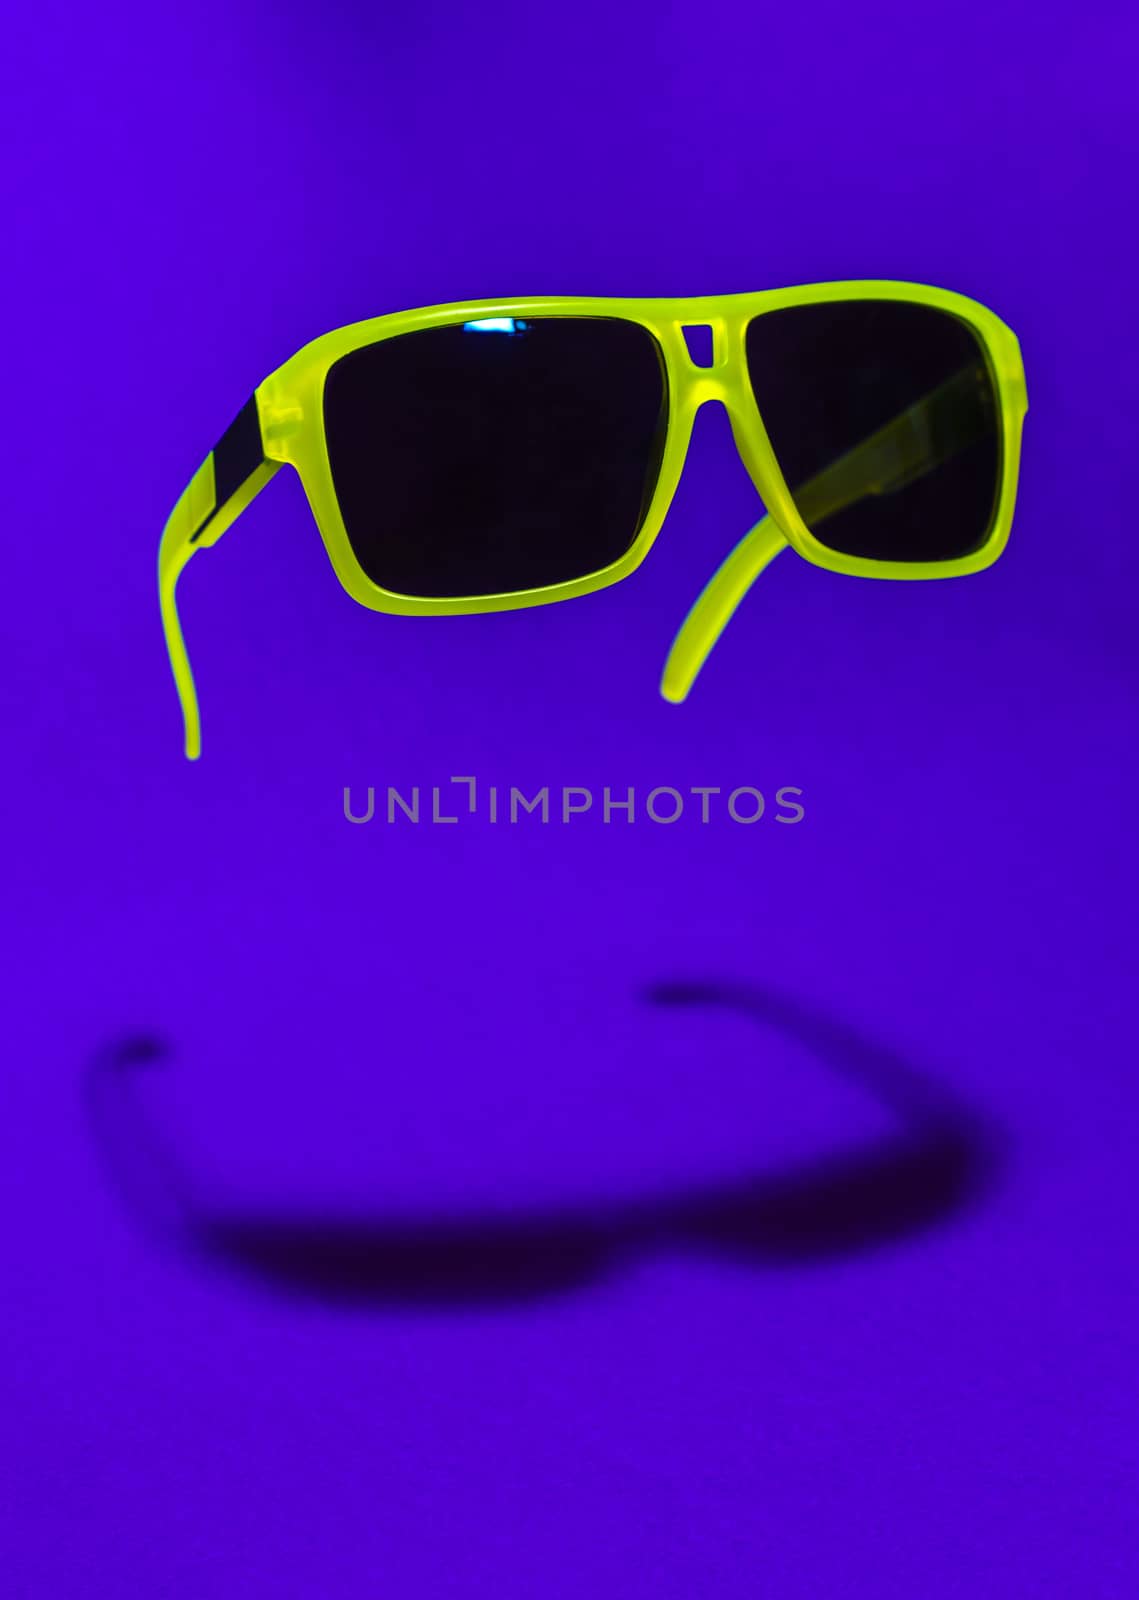 Bright green colour sun glasses in the air. Green floating in the air sunglasses on purple background. Lower shadow below the glasses. Minimalism summer concept.